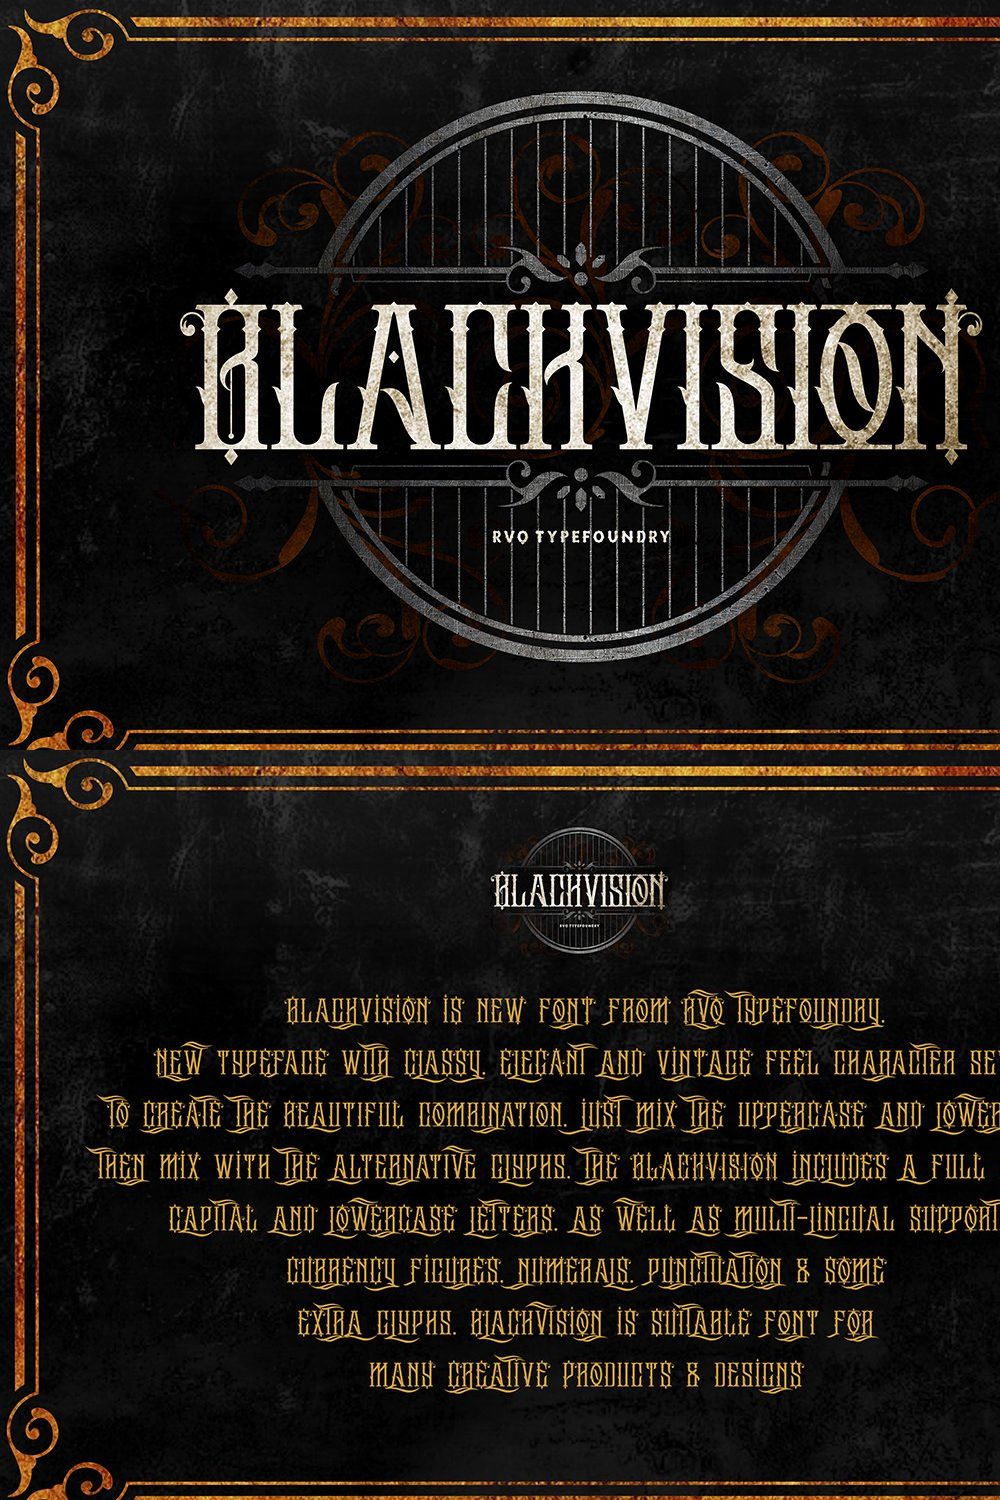 The Black vision (intro sale) pinterest preview image.